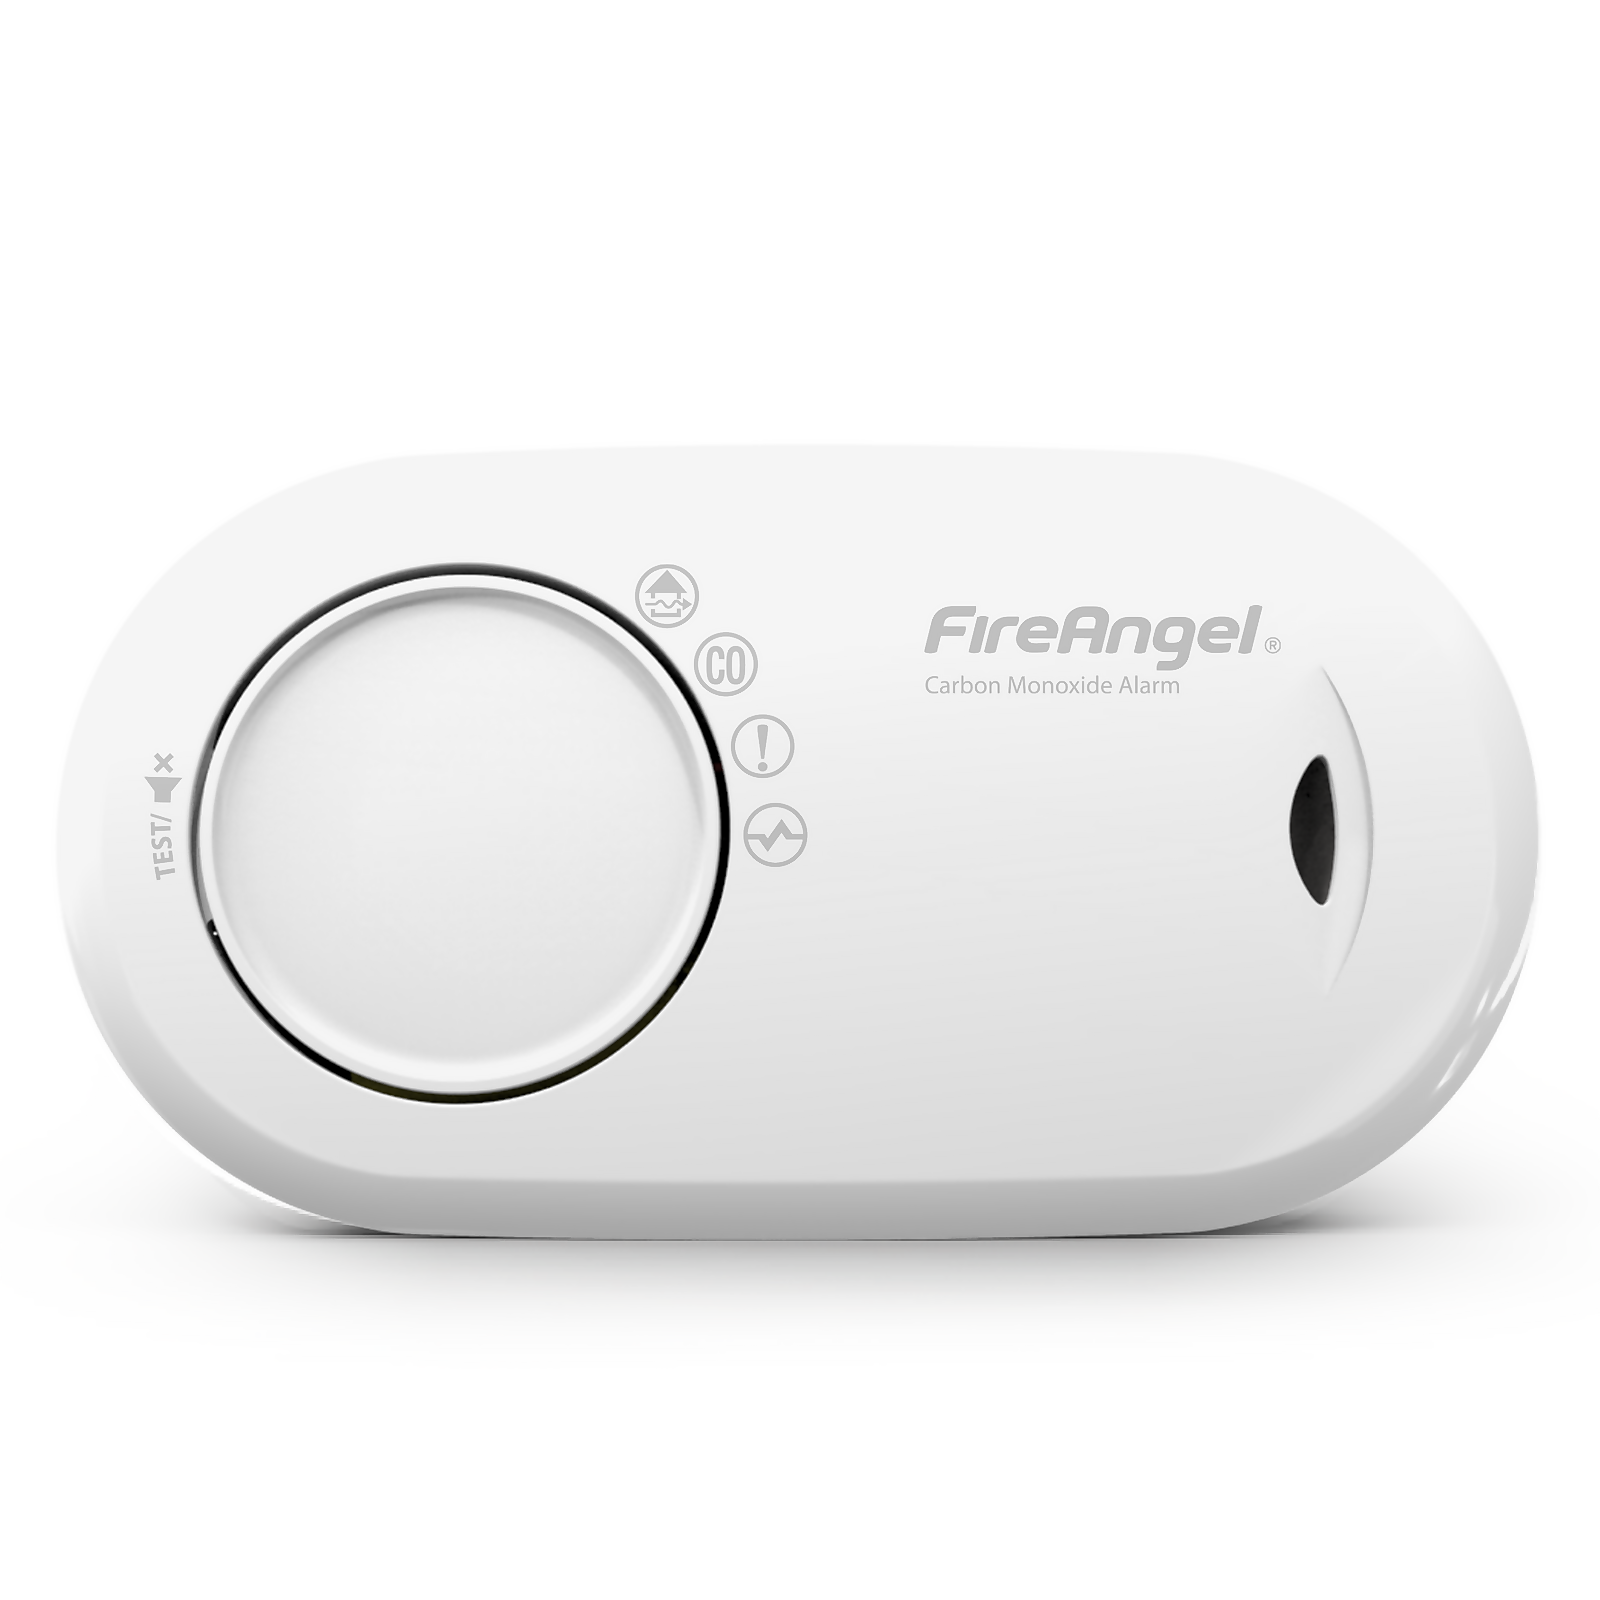 FireAngel Carbon Monoxide Alarm with 10 Year Sealed For Life Battery